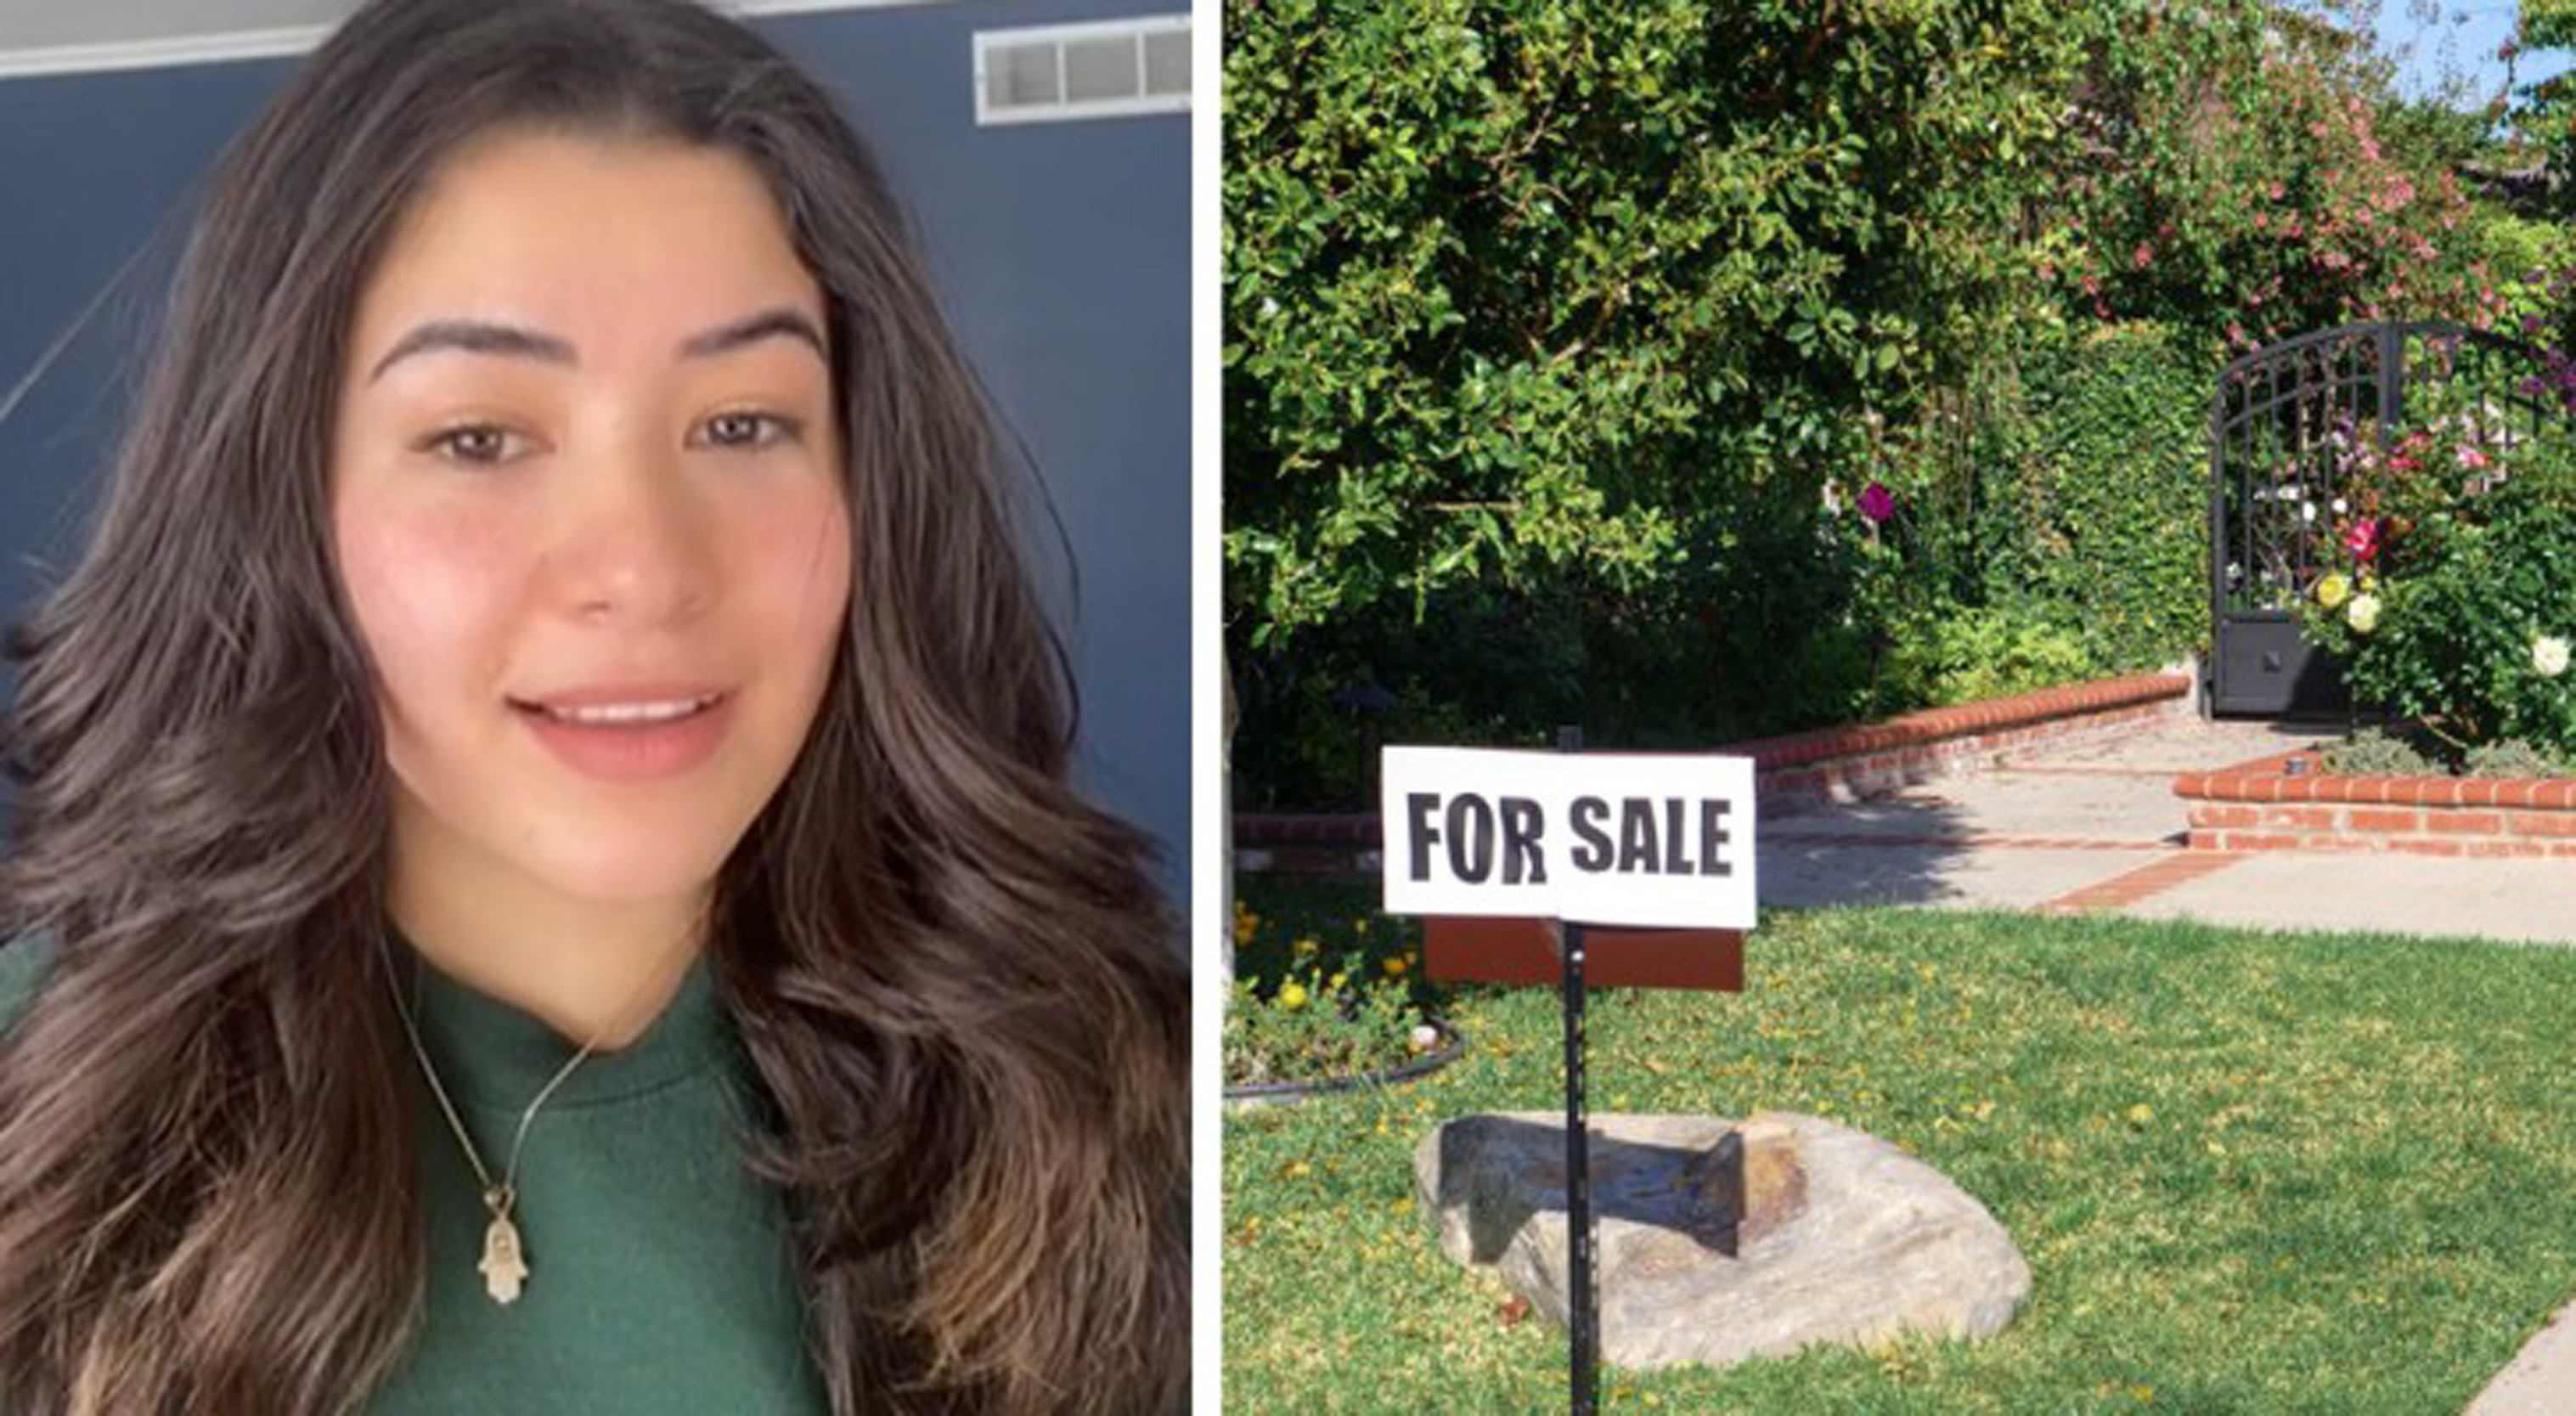 Her boyfriend moves into the house she bought and wants to become the owner of the property